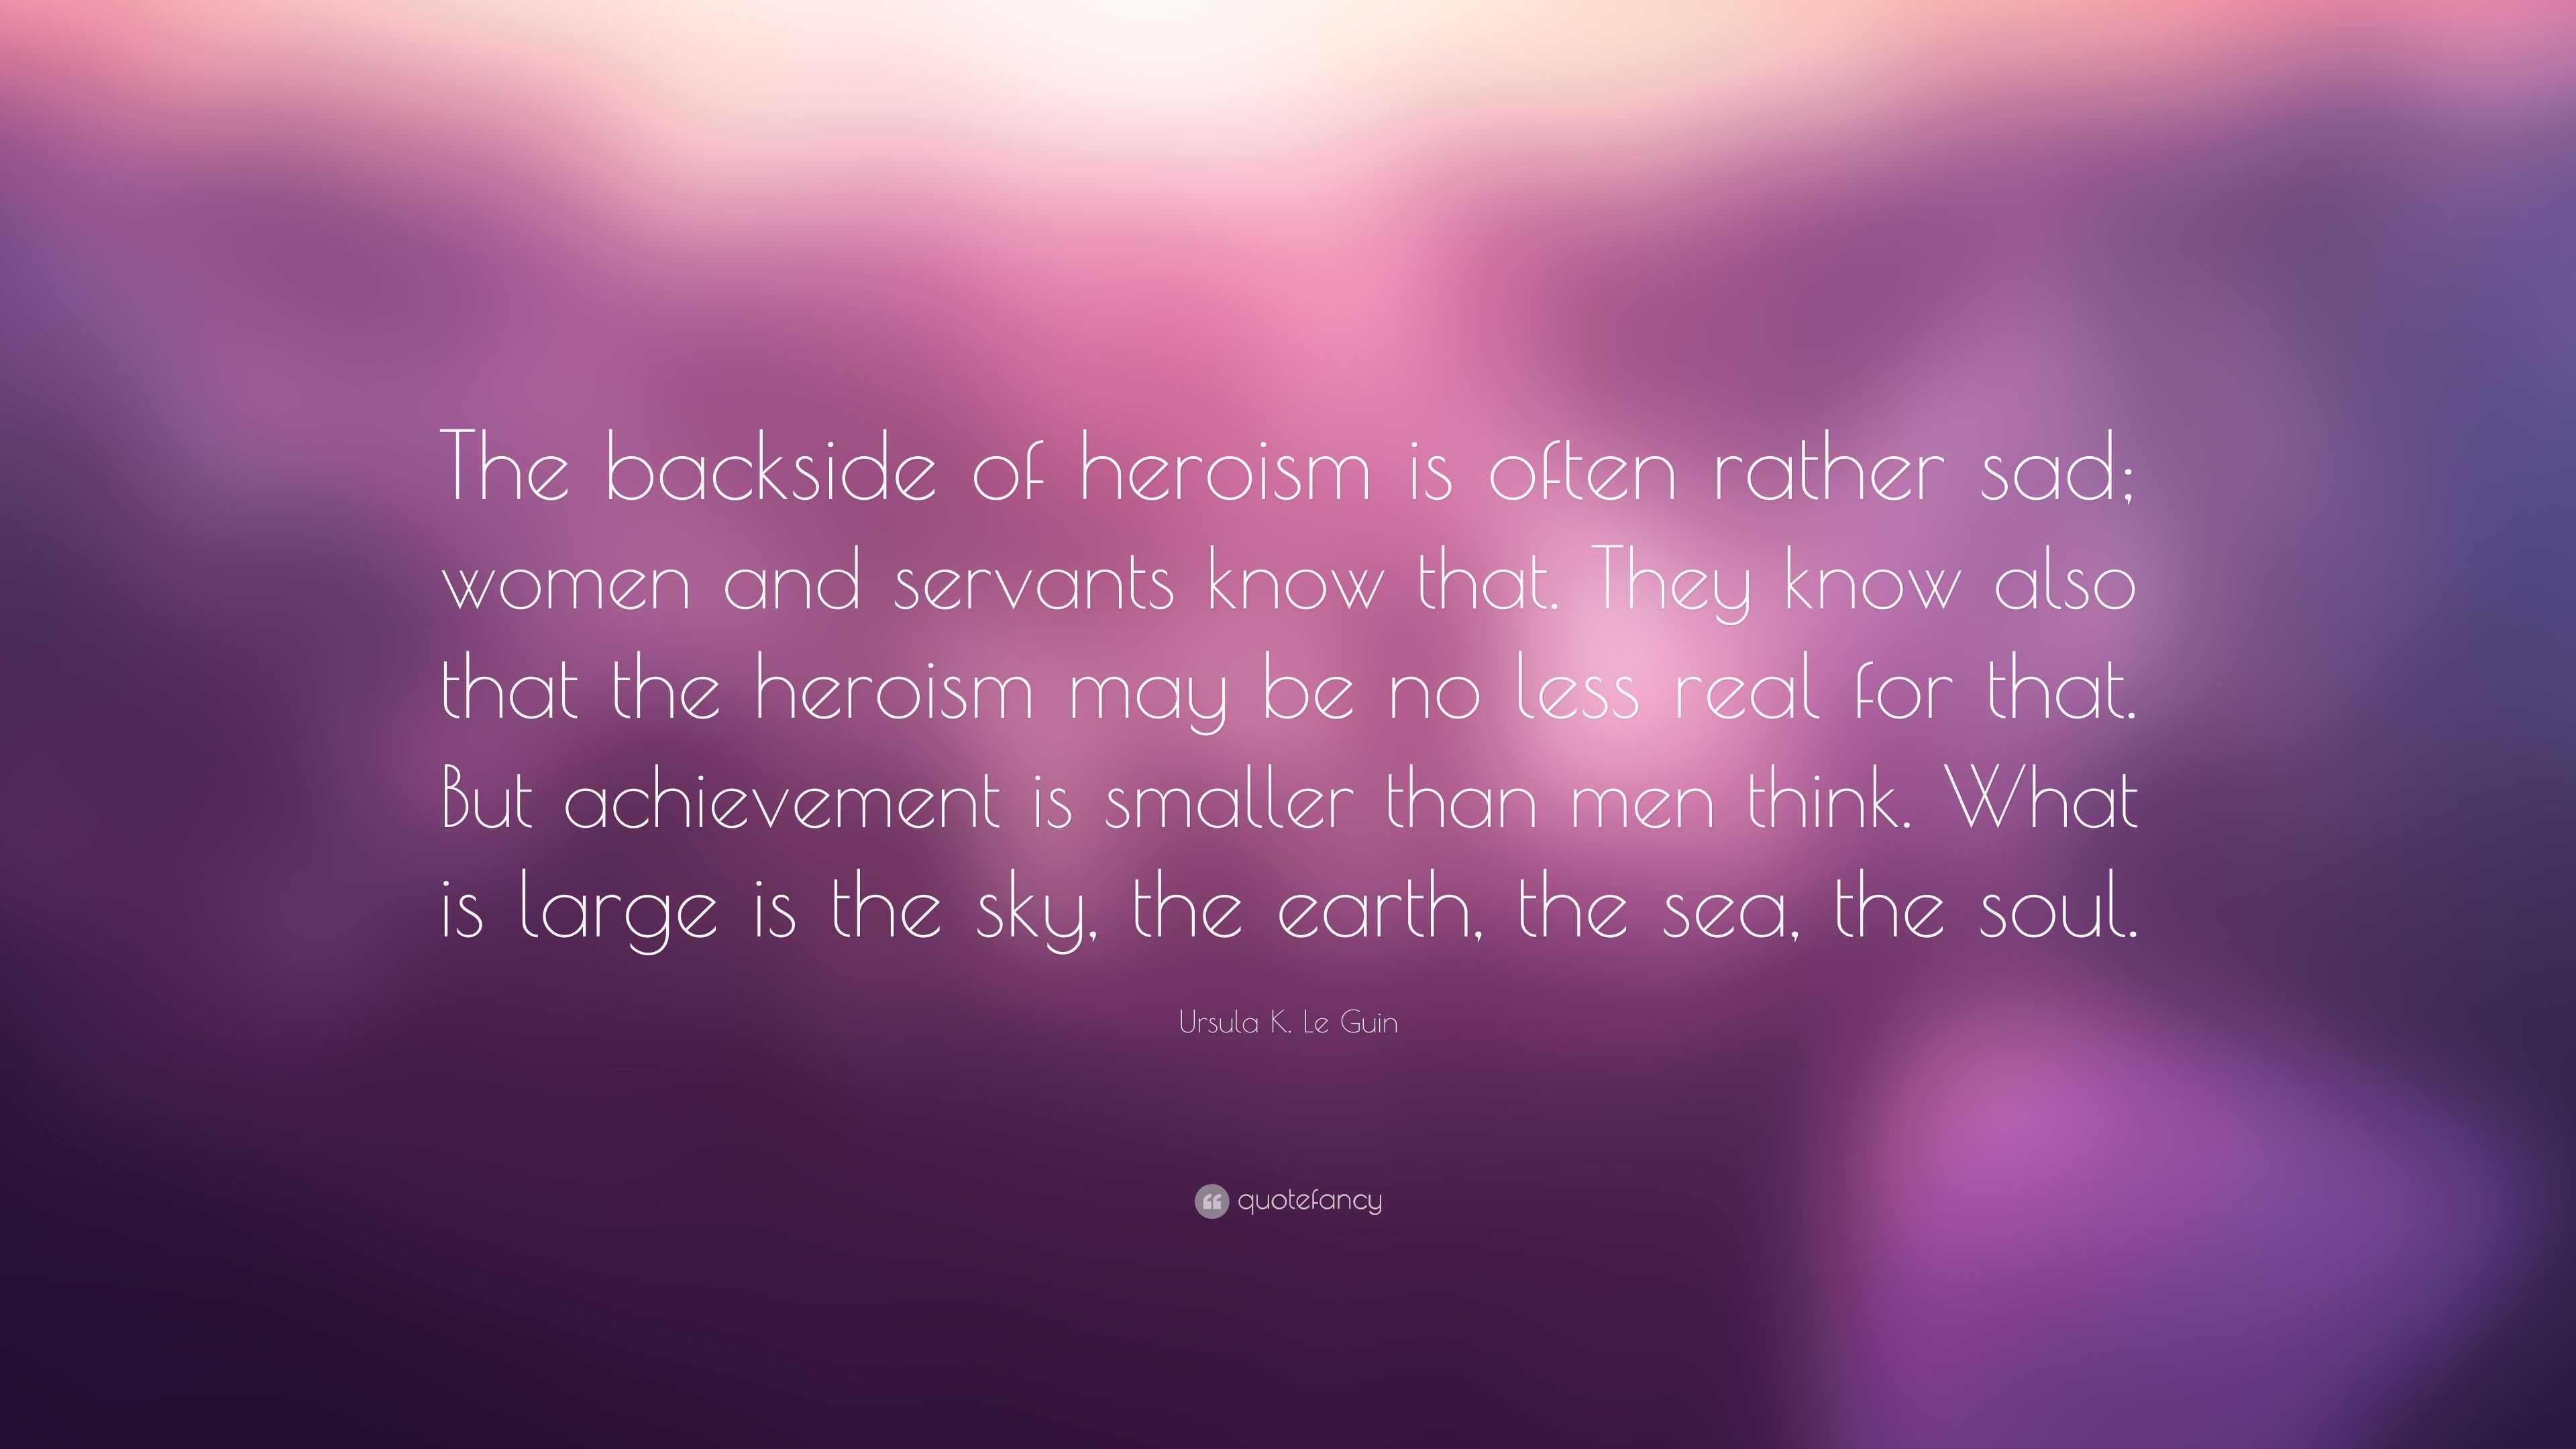 Ursula K. Le Guin Quote: “The backside of heroism is often rather sad ...